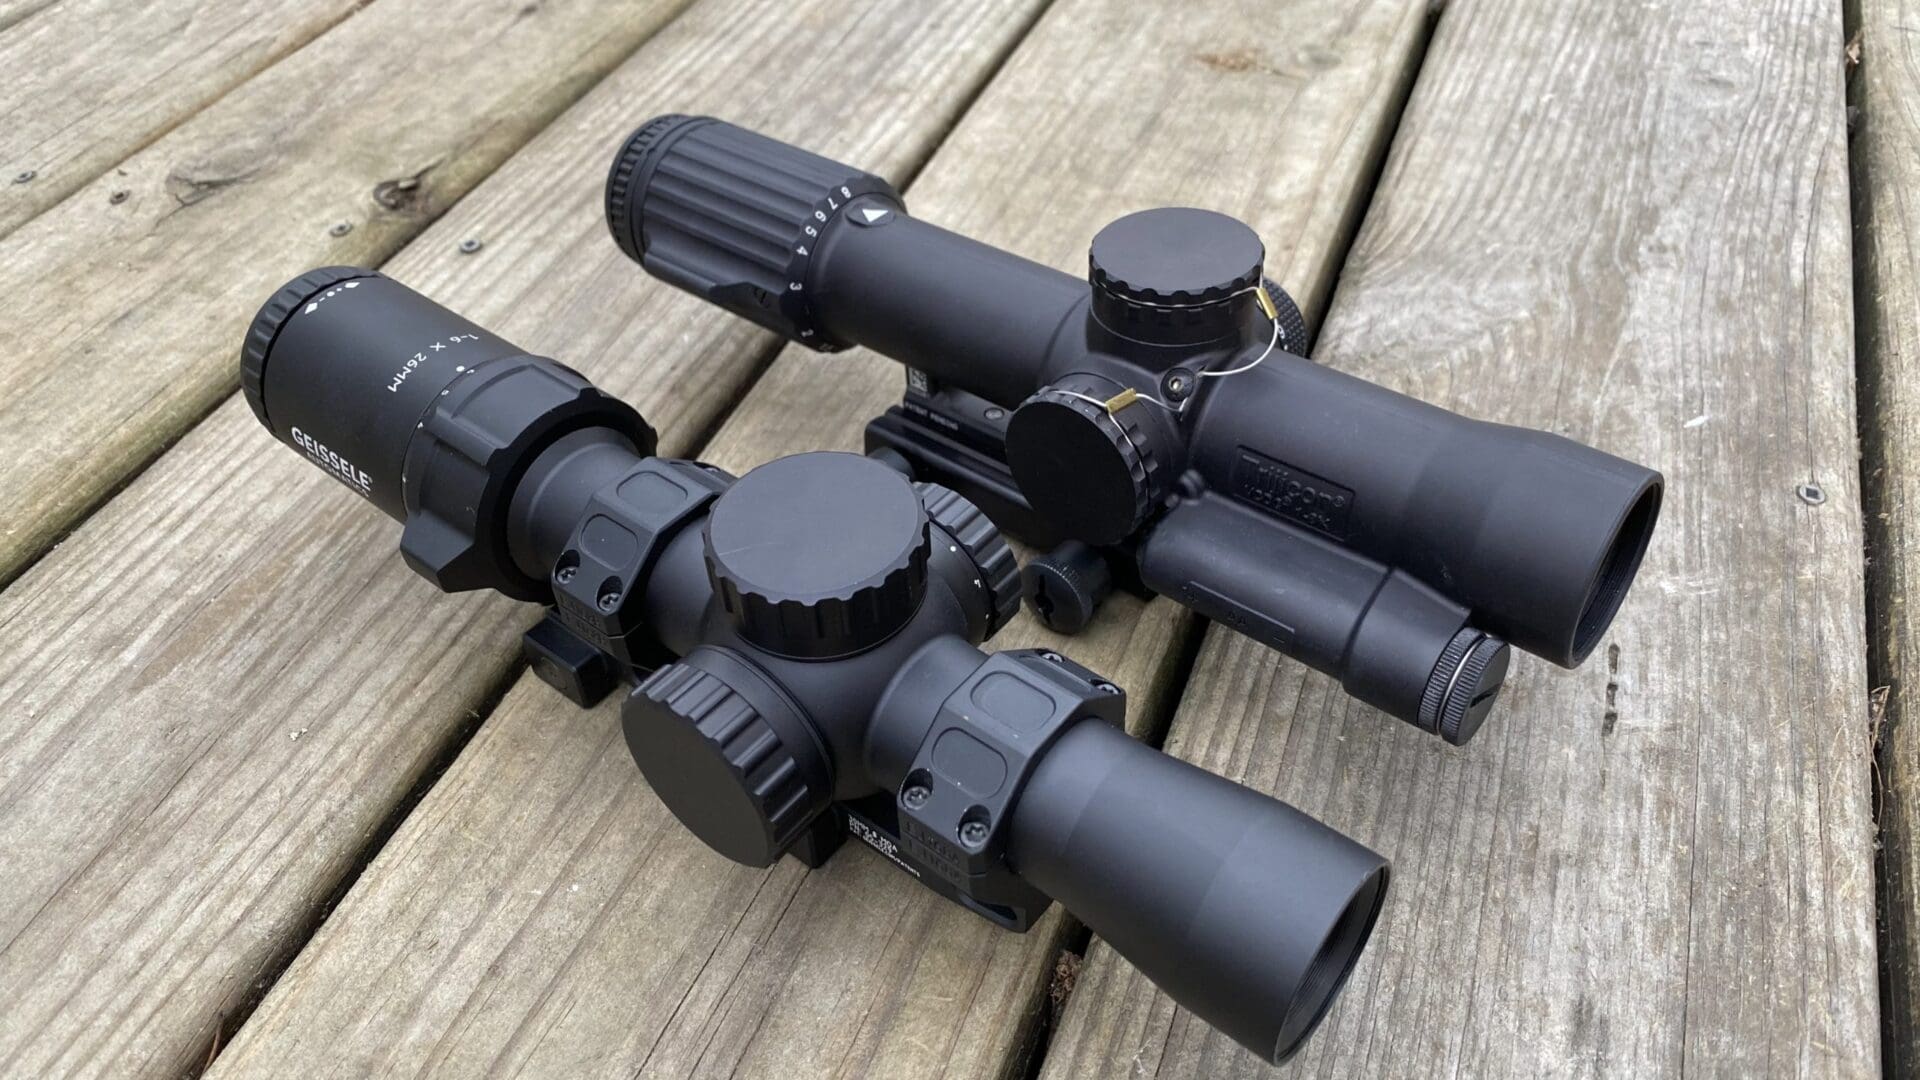 Equipping your patrol rifle with low-powered variable optics